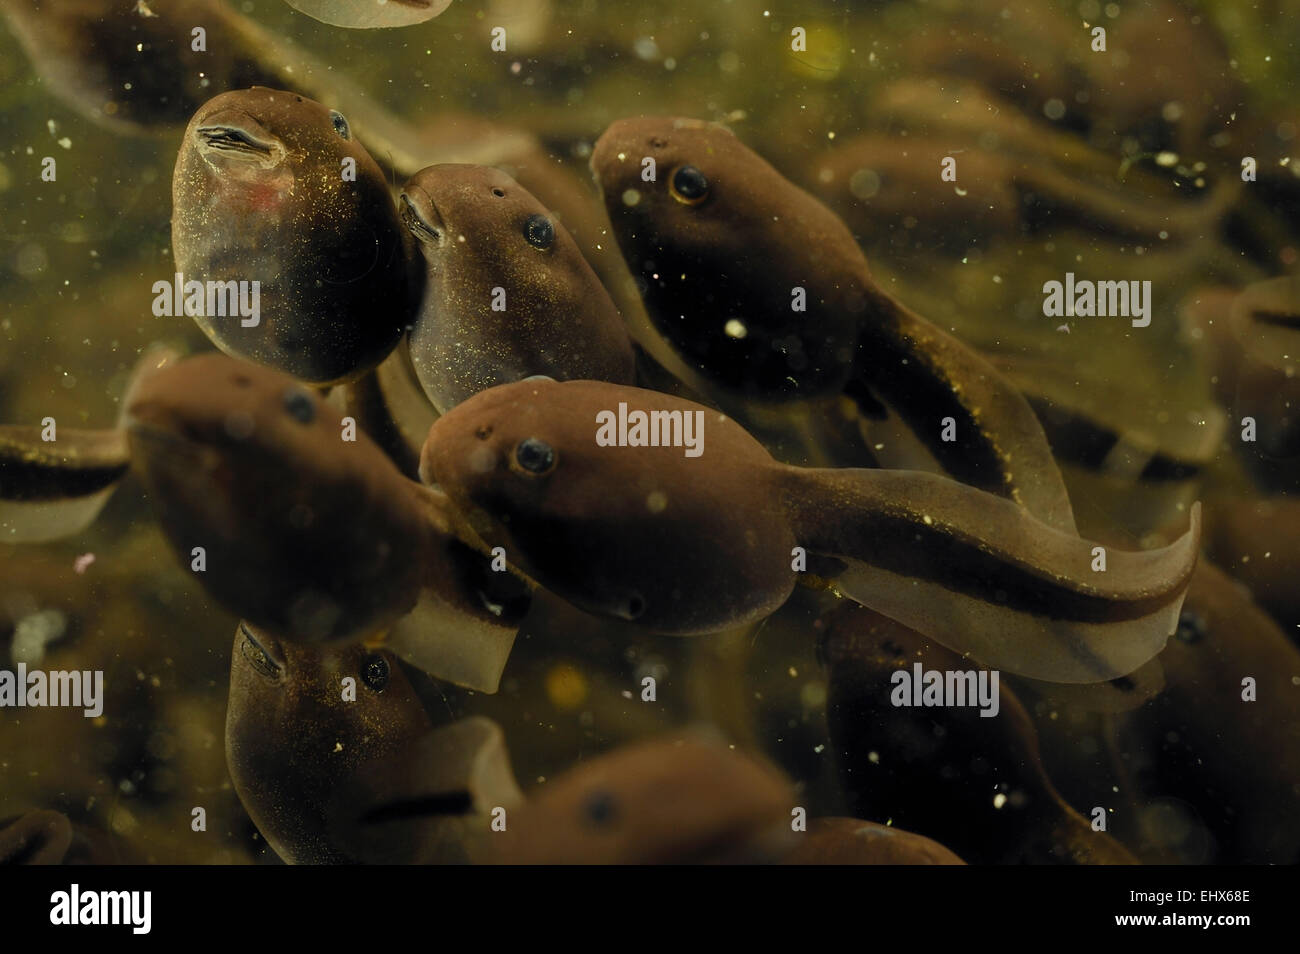 Common European toad (Bufo bufo) tadpoles congregating in a lake, Moelln, northern Germany | Stock Photo